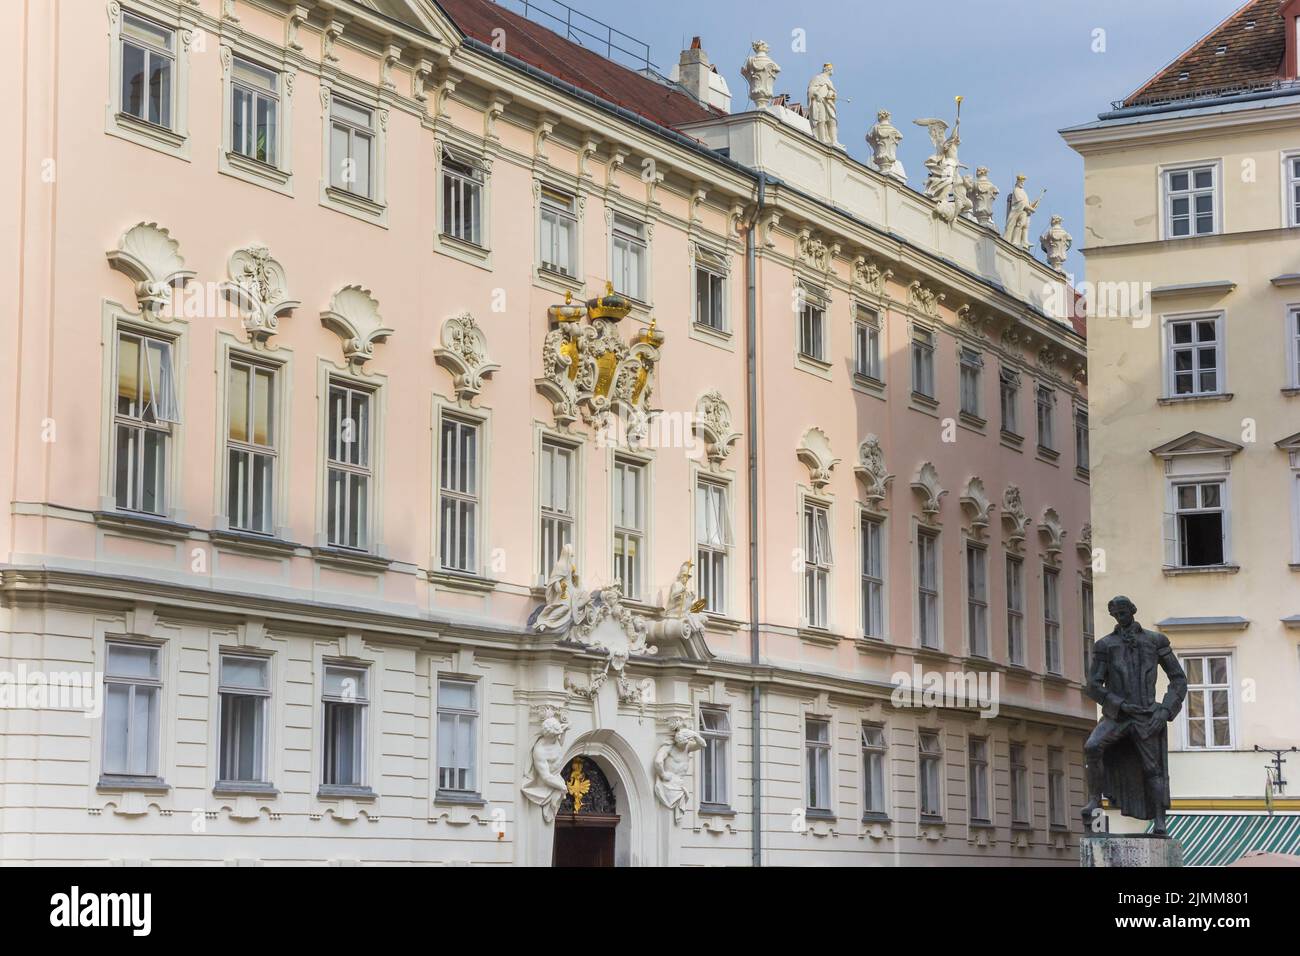 Lessing statue in front of baroque architecture in Vienna, Austria Stock Photo